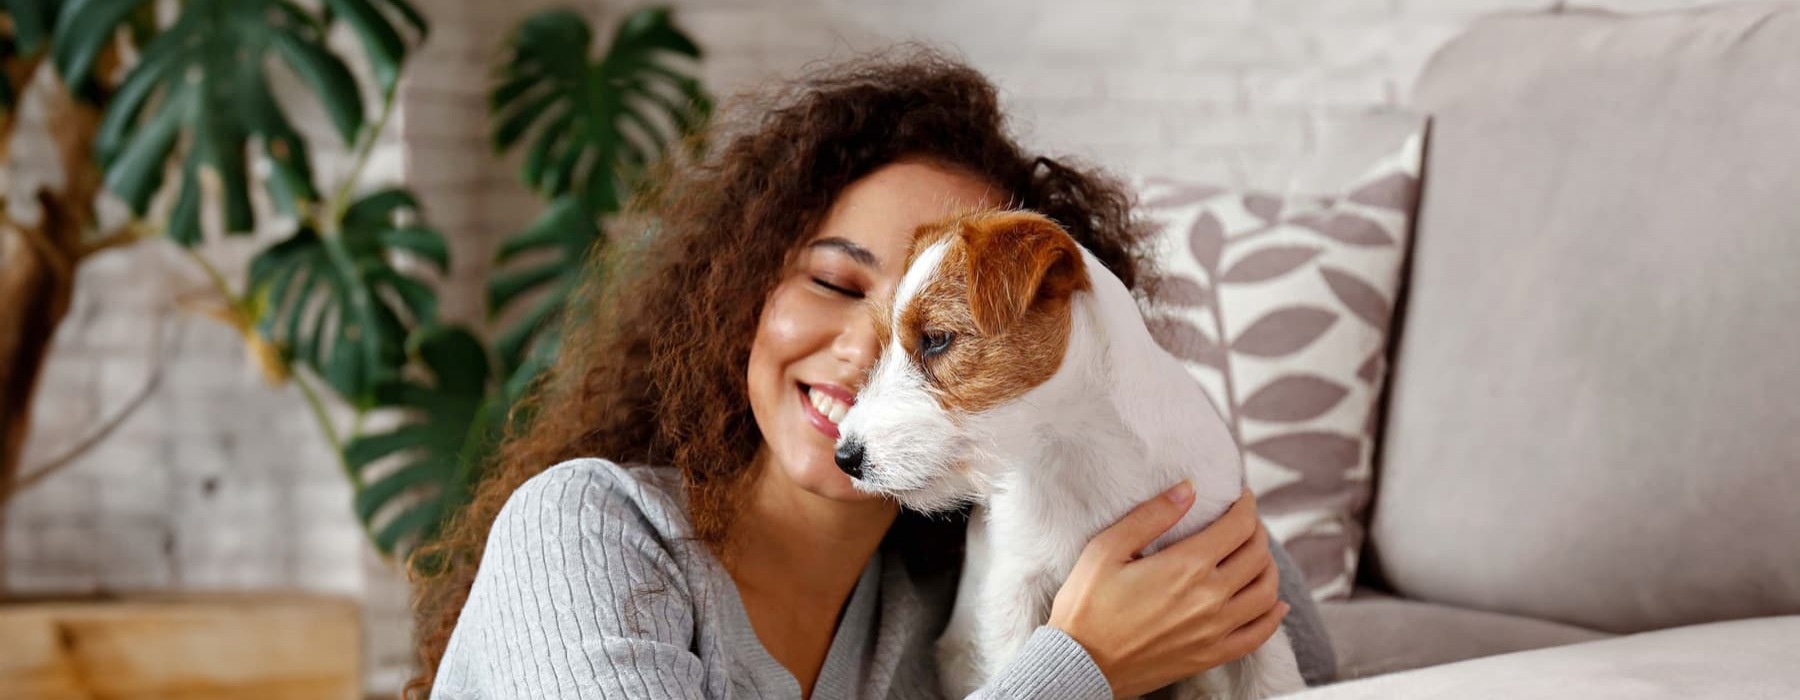 a woman embracing with her puppy in a living room